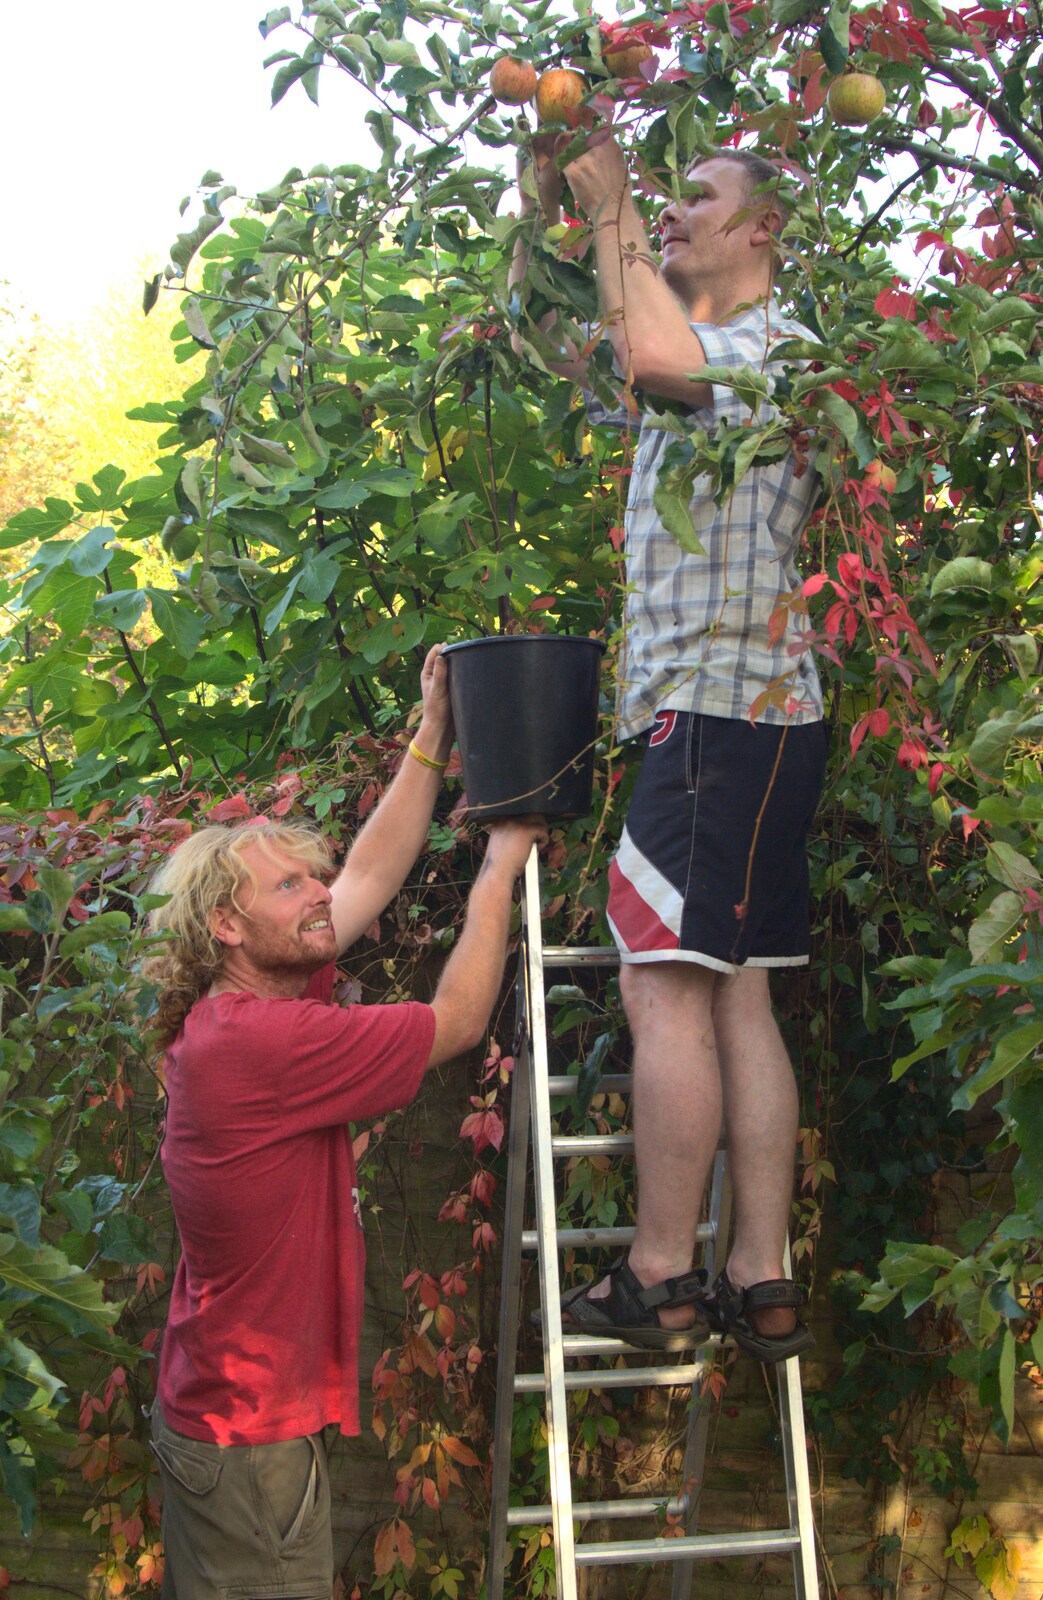 Wavy holds a bucket as Mike's up a ladder from An Apple-Picking Heatwave, and Other Stories, London and Brome, Suffolk - 2nd October 2011